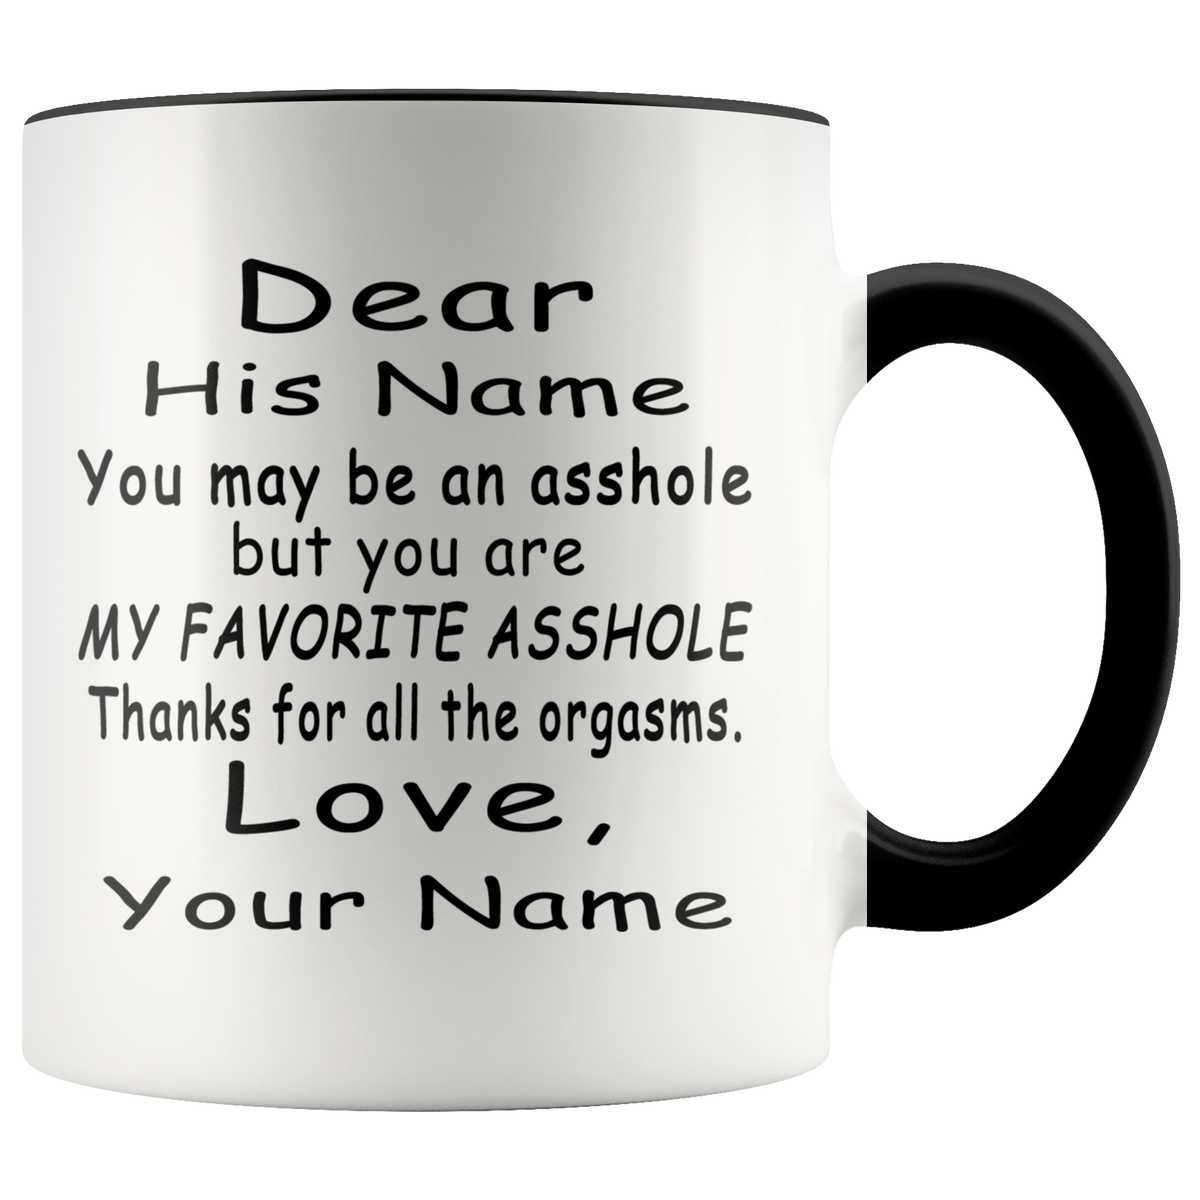 Personalized Funny Mug Inappropriate Gag Gift For Him Boyfriend Husband Fiancé, Thanks For All The Orgasms Accent Coffee Mug 11oz (black)